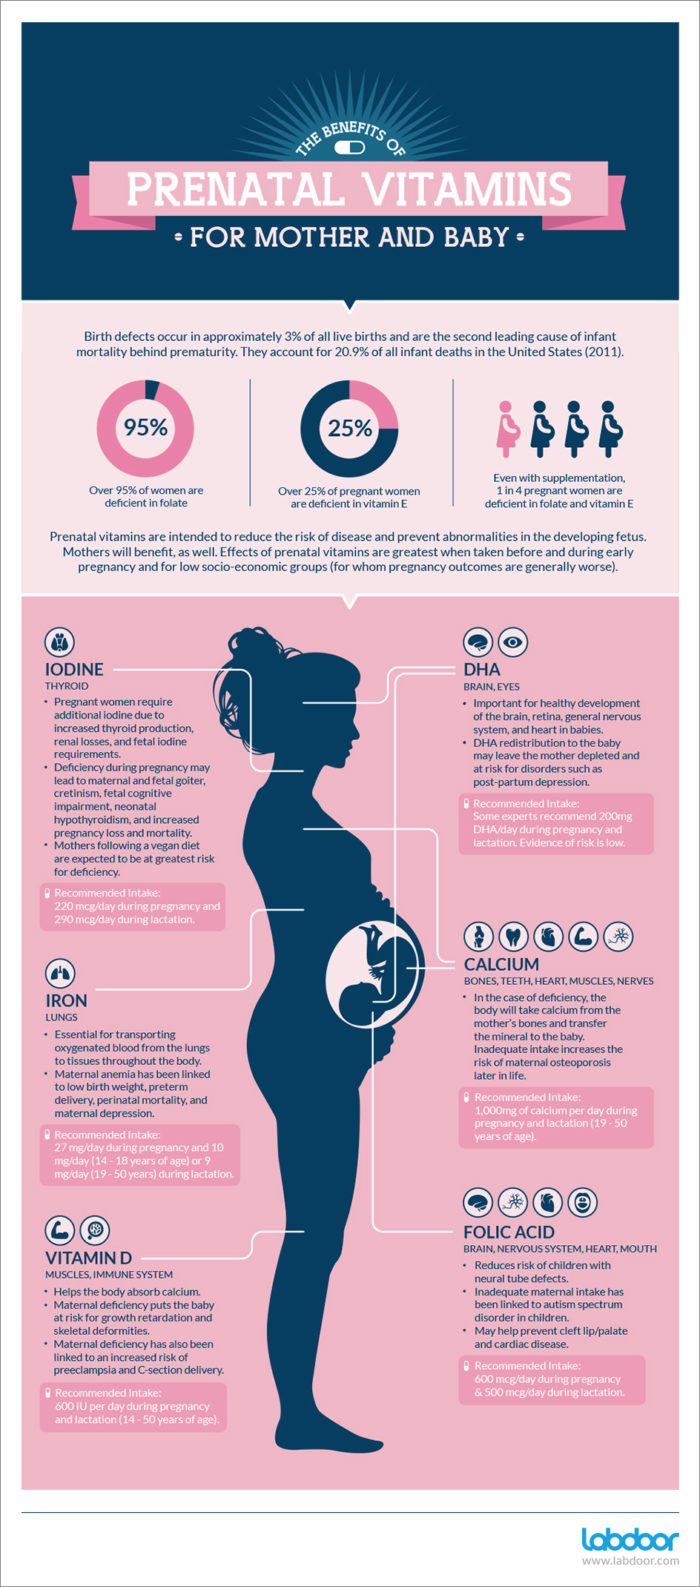 Useful Infographic on The Benefits Of Prenatal Vitamins For Mom And Baby – Labdoor Magazine